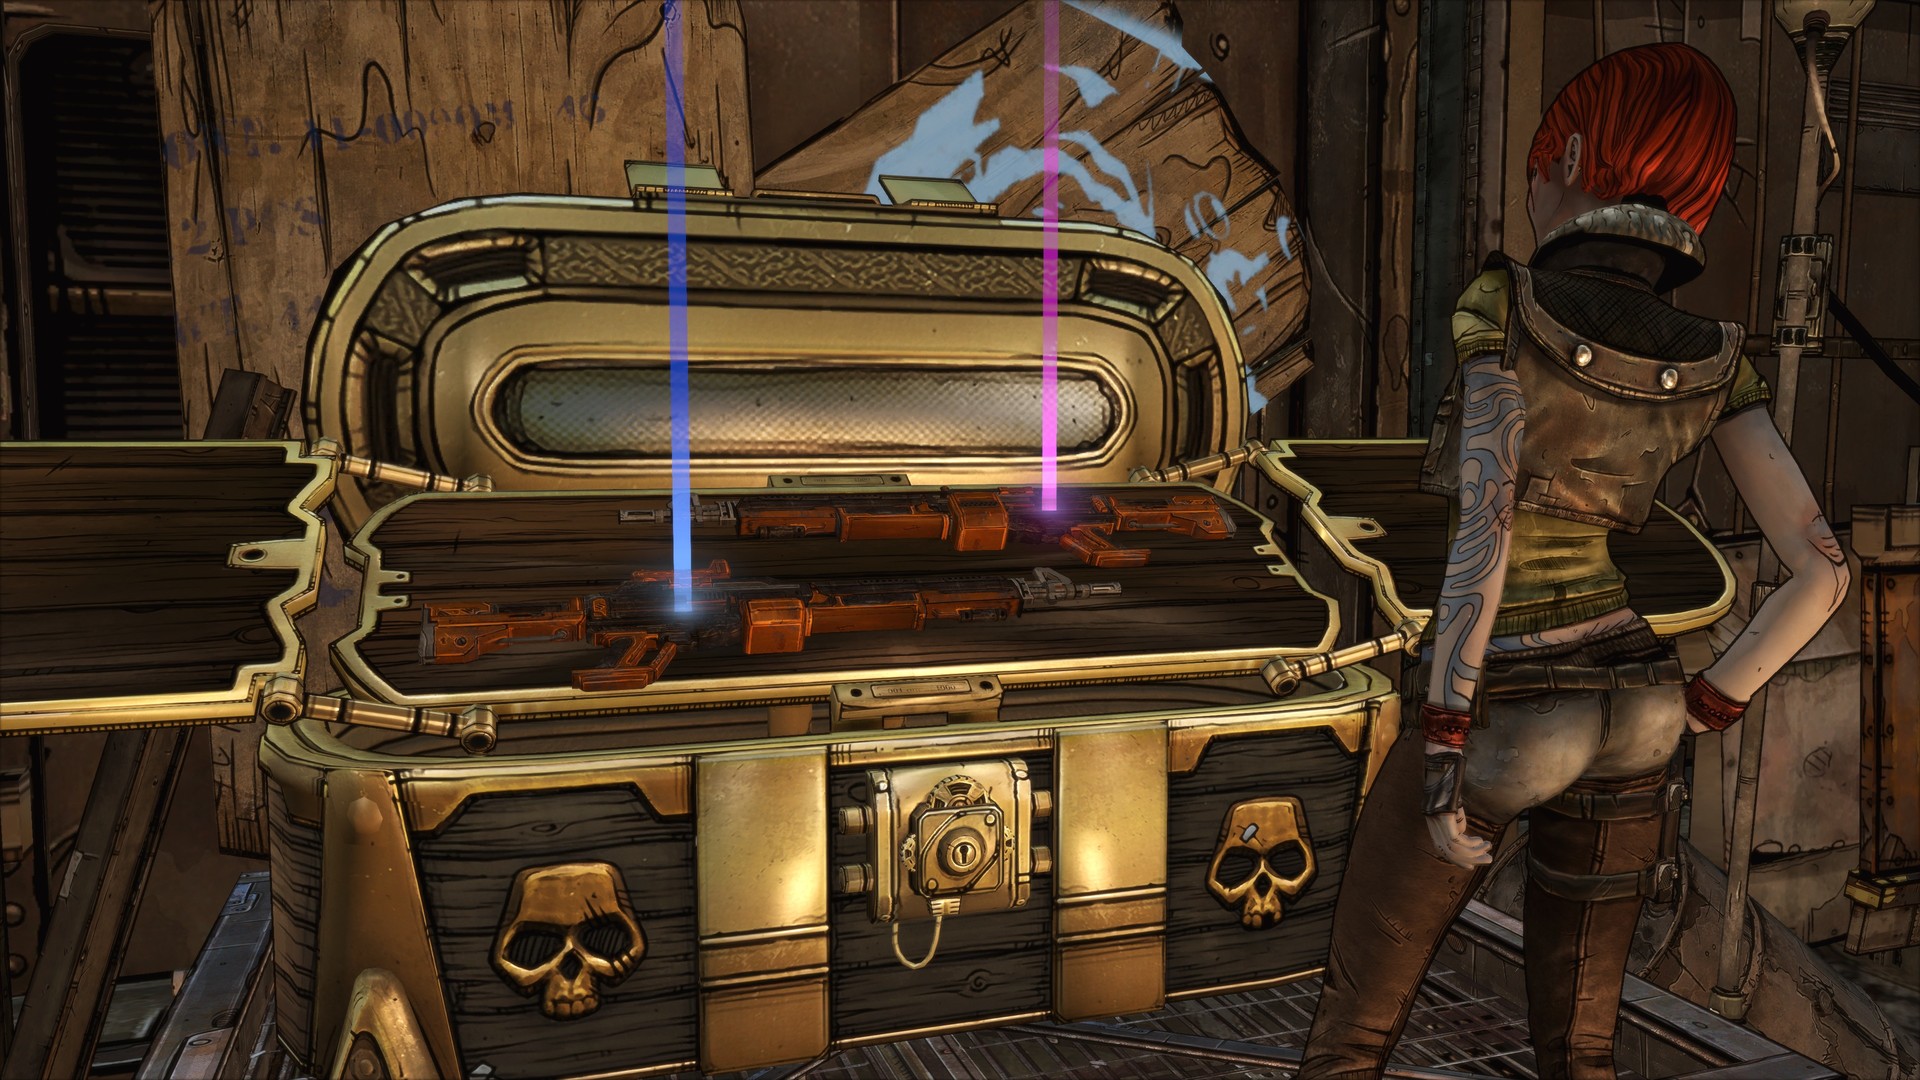 Borderlands is all about loot